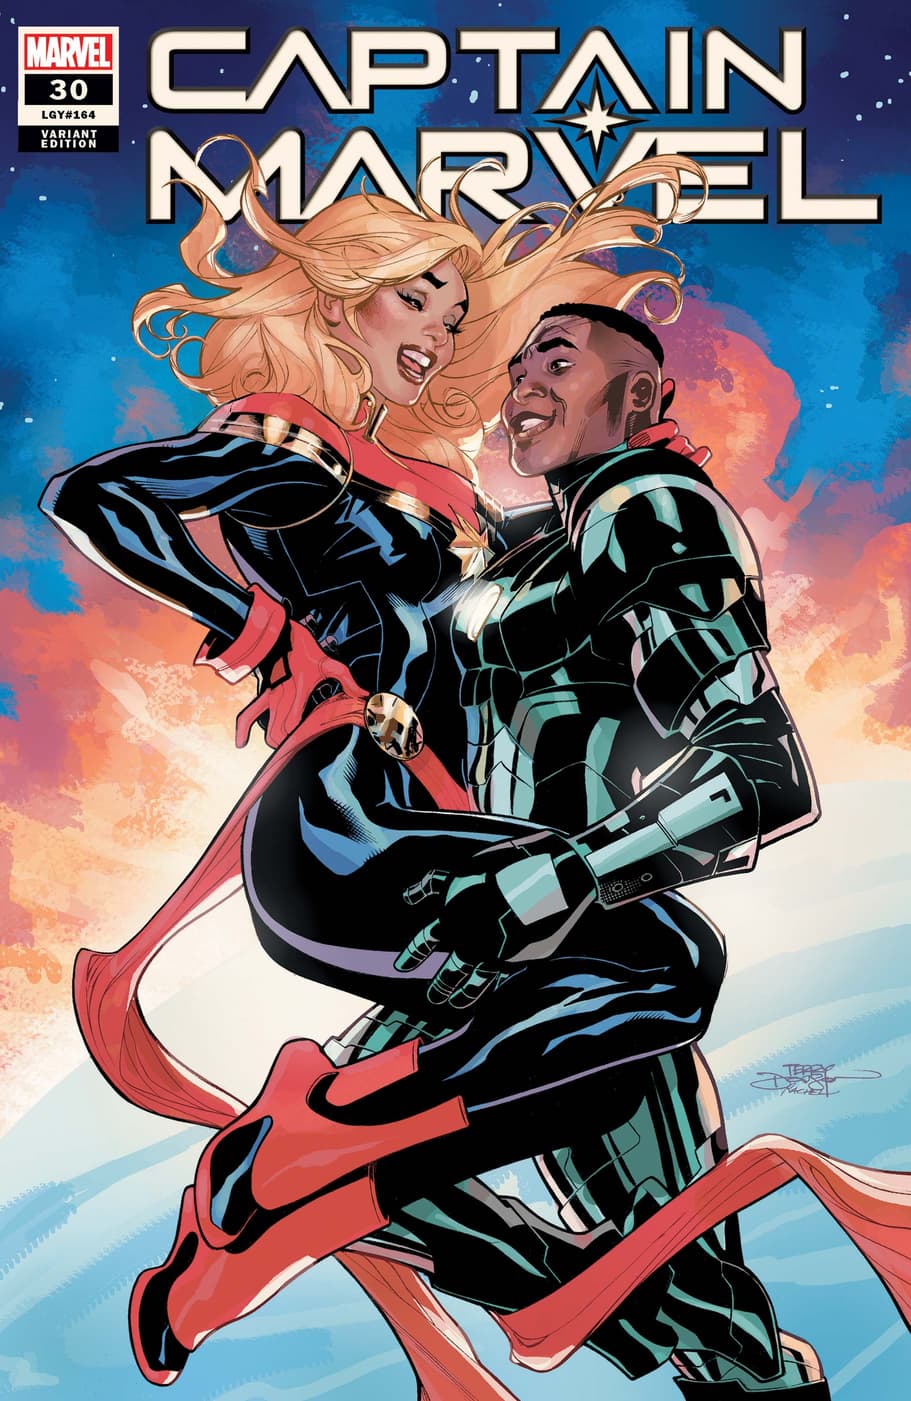 CAPTAIN MARVEL #30 variant cover by Terry Dodson